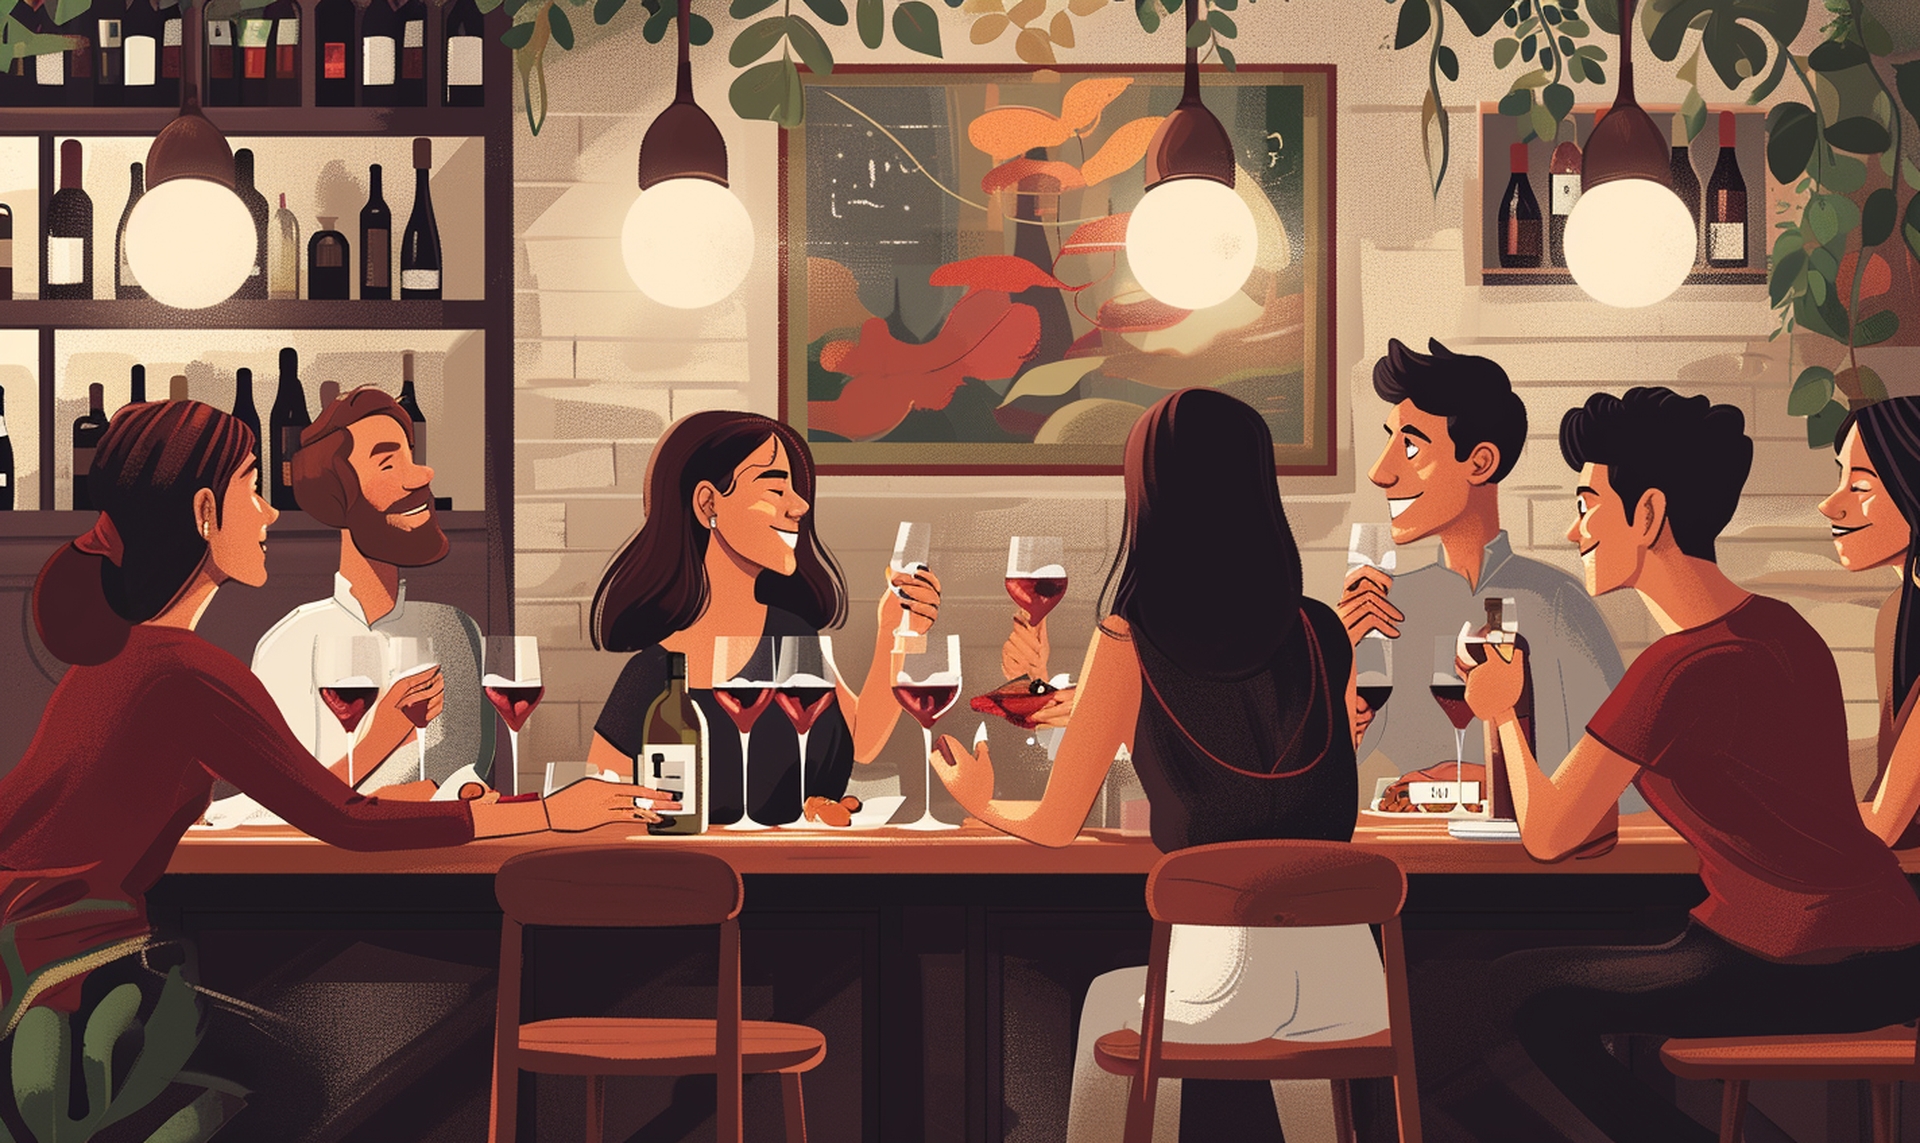 A diverse group of people enjoying a glass of wine, symbolizing the universal appeal of the wine focused on in 'What is a wine everyone likes.'